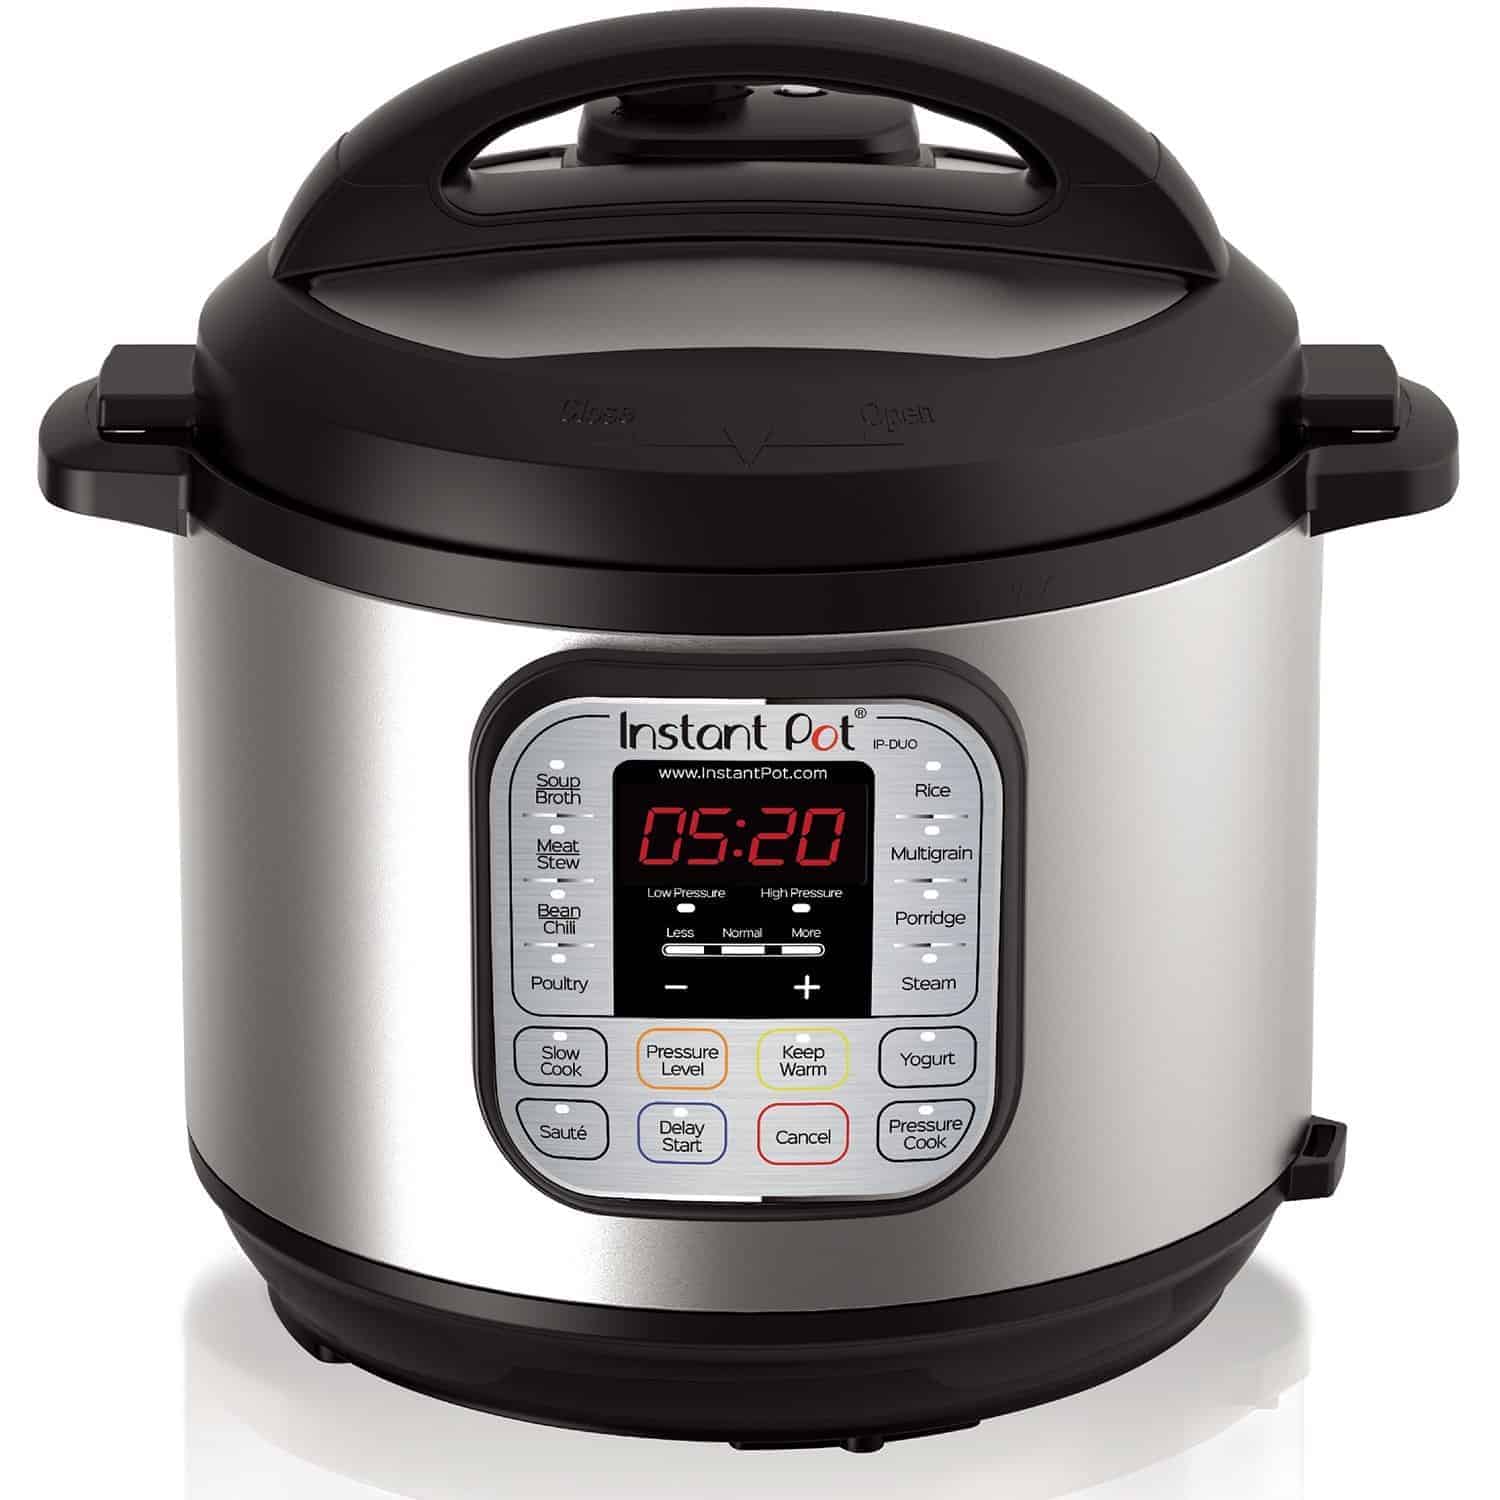 Trying to bring my Instant Pot back from the dead - Suzie The Foodie